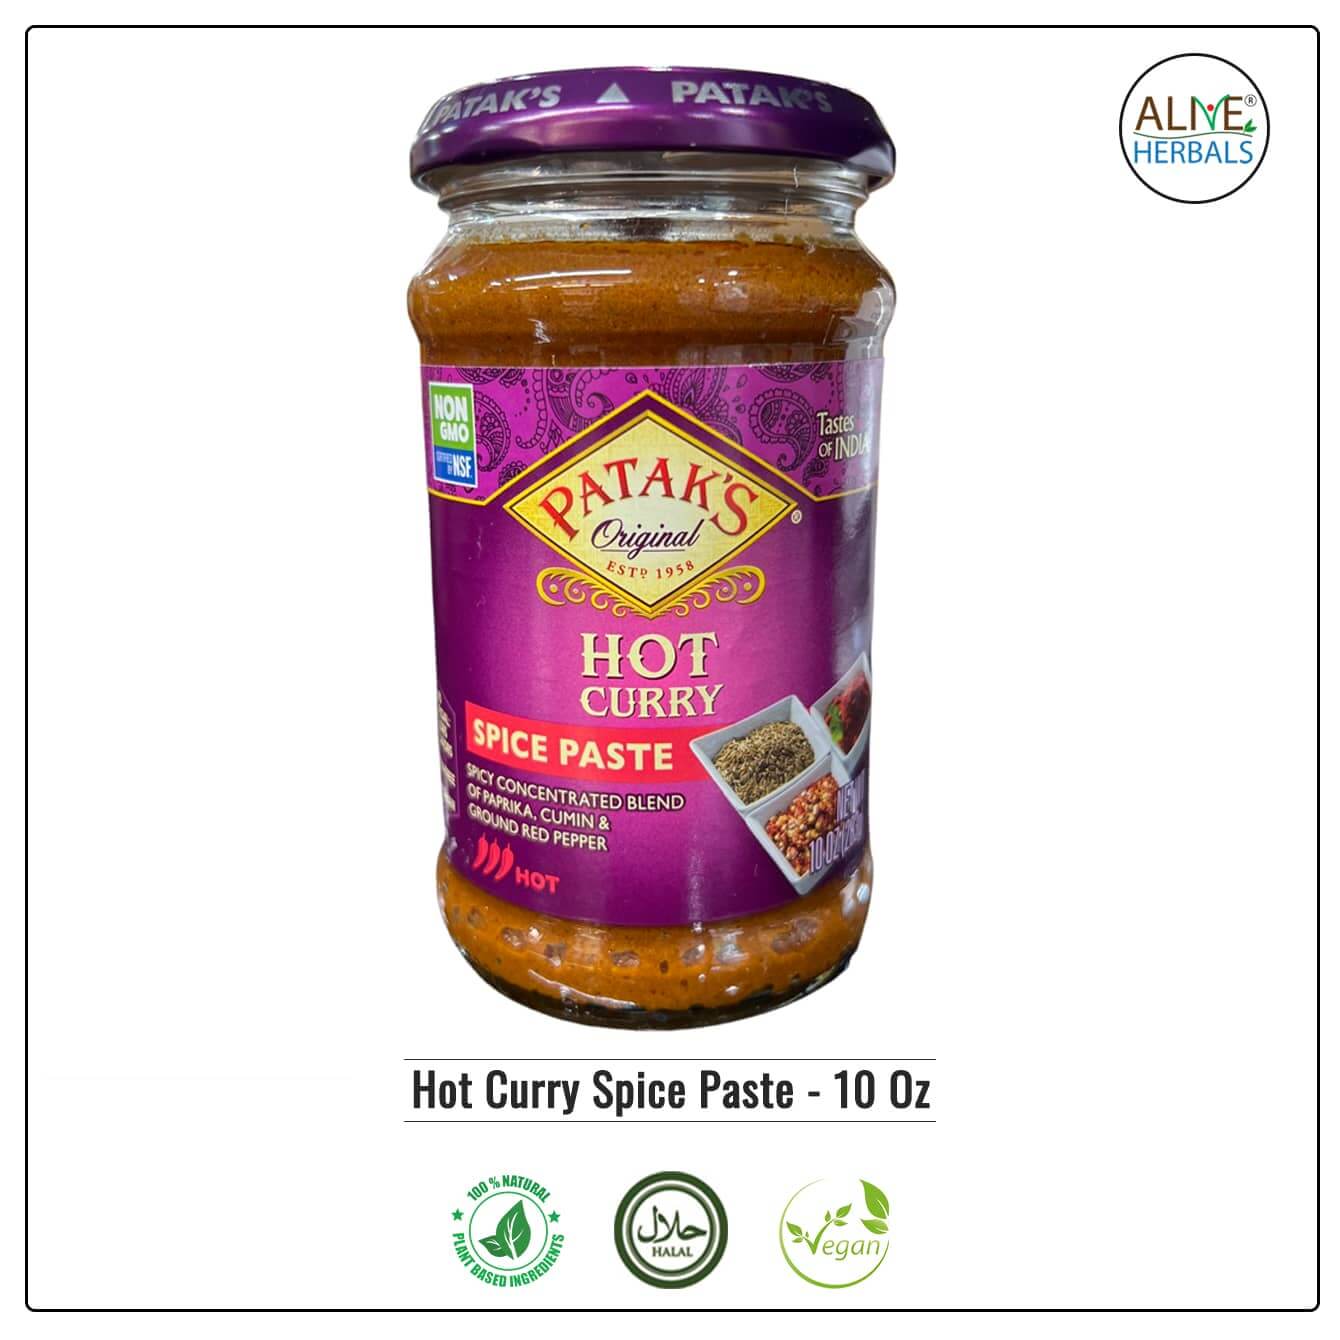 Hot Curry Spice Paste - Alive Herbals